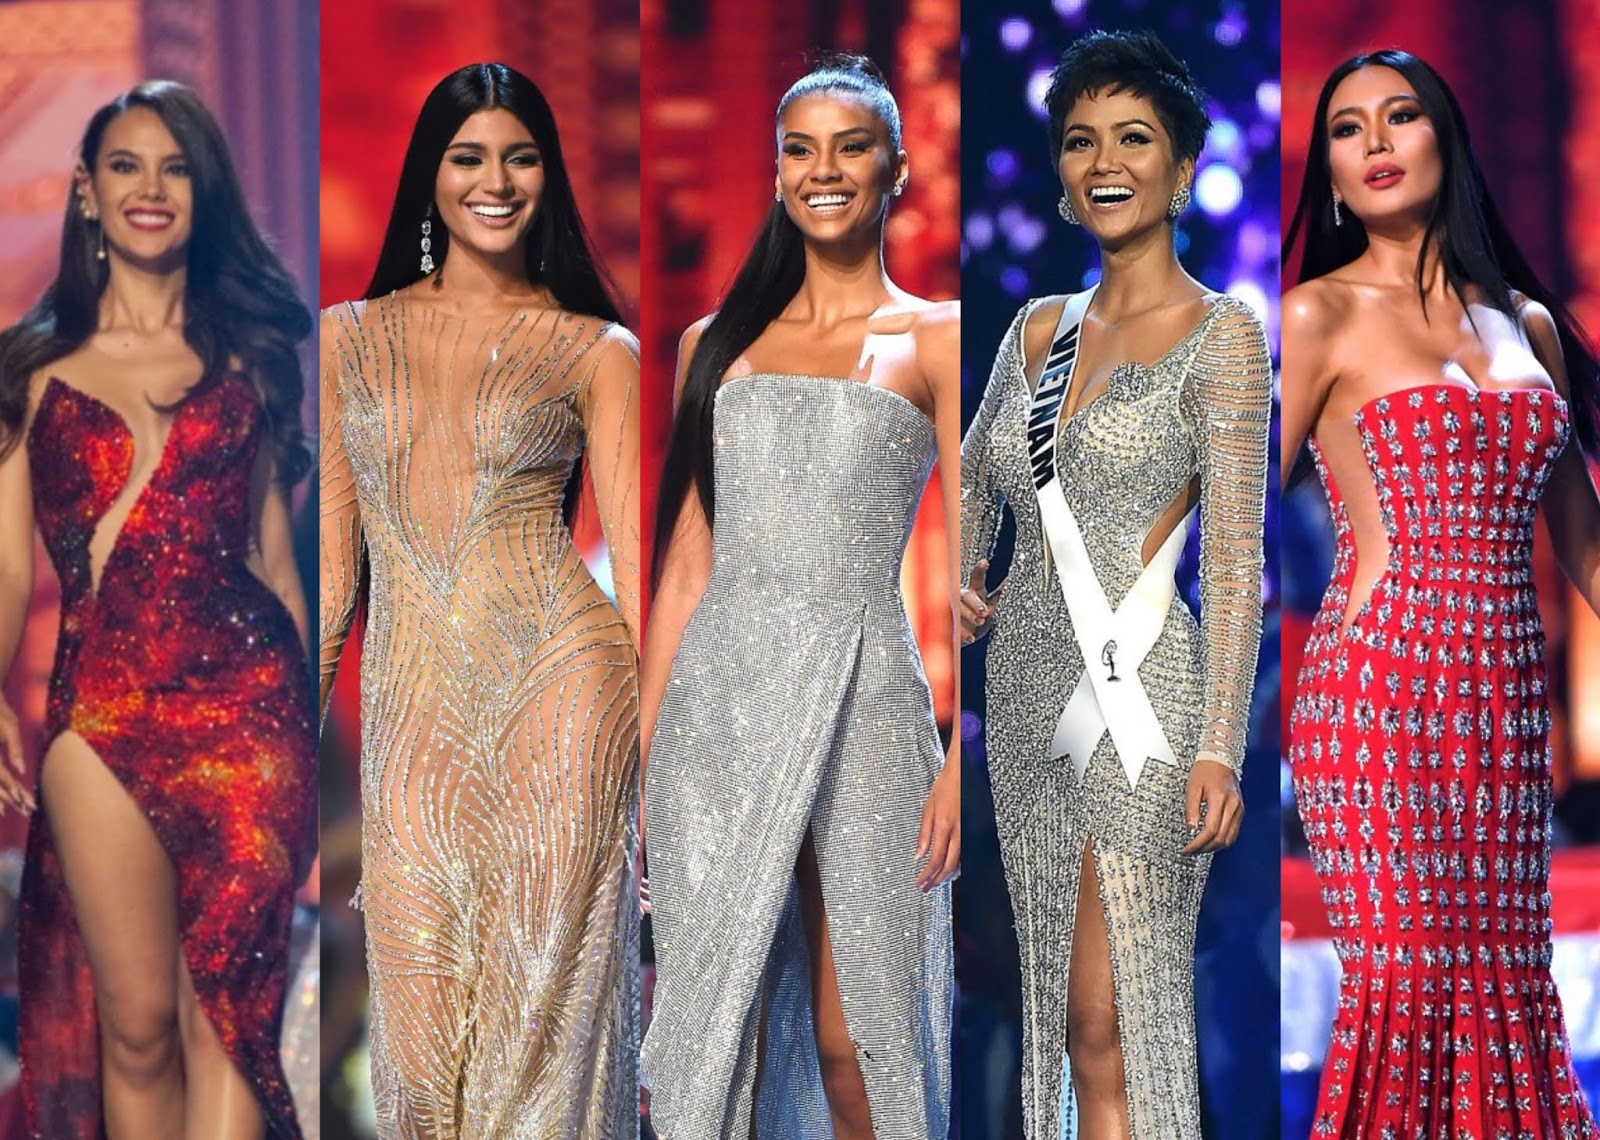 sashes-and-tiaras-miss-universe-2018-finals-winner-top-10